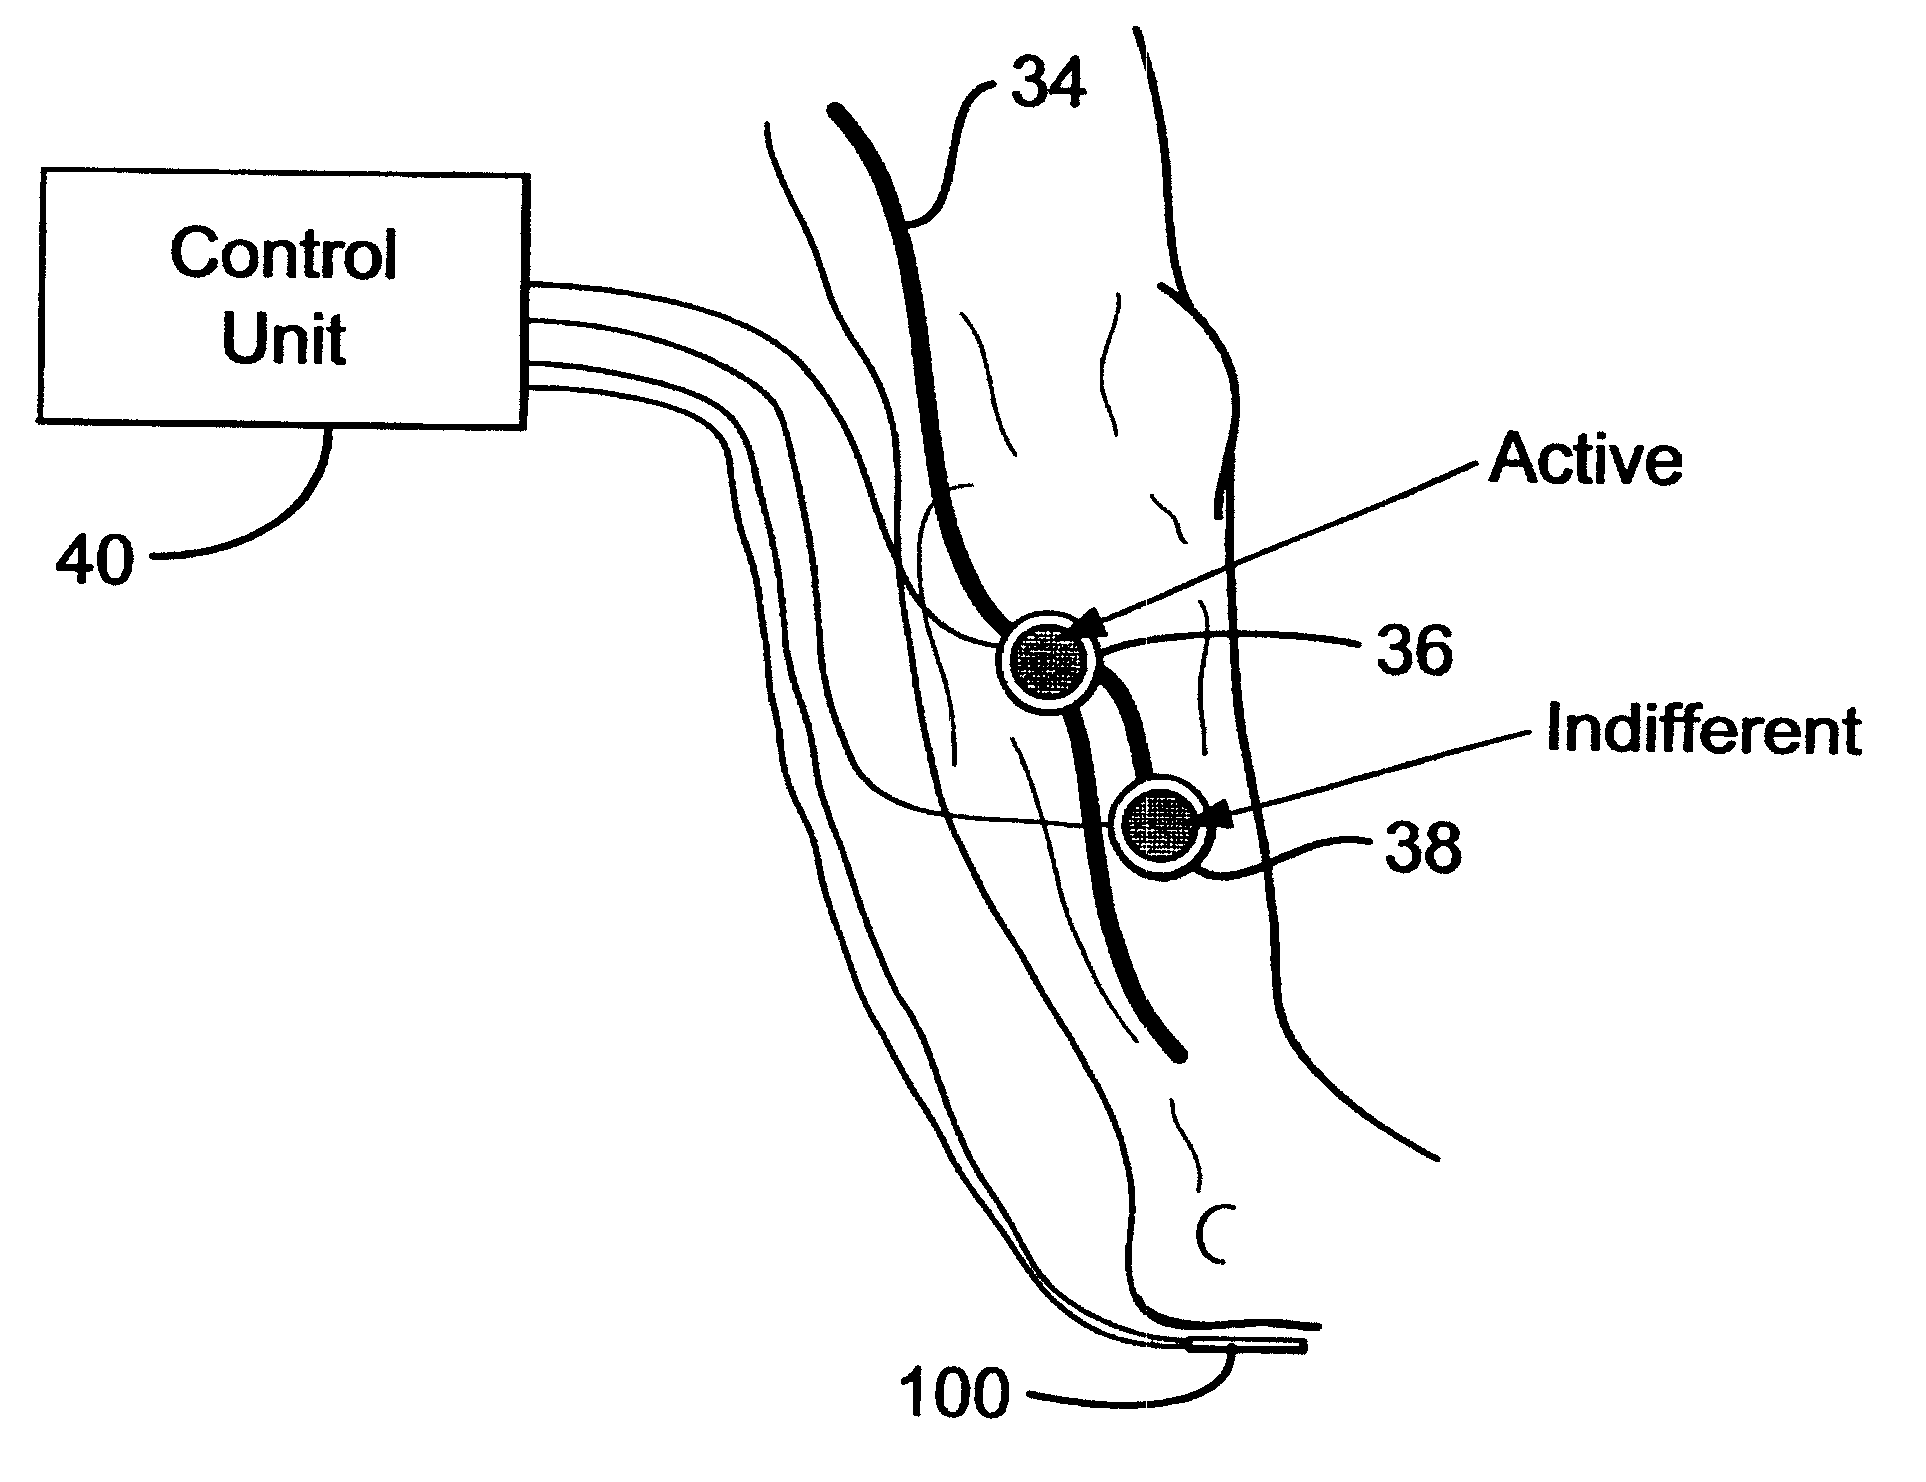 Apparatus for electrical stimulation of the body